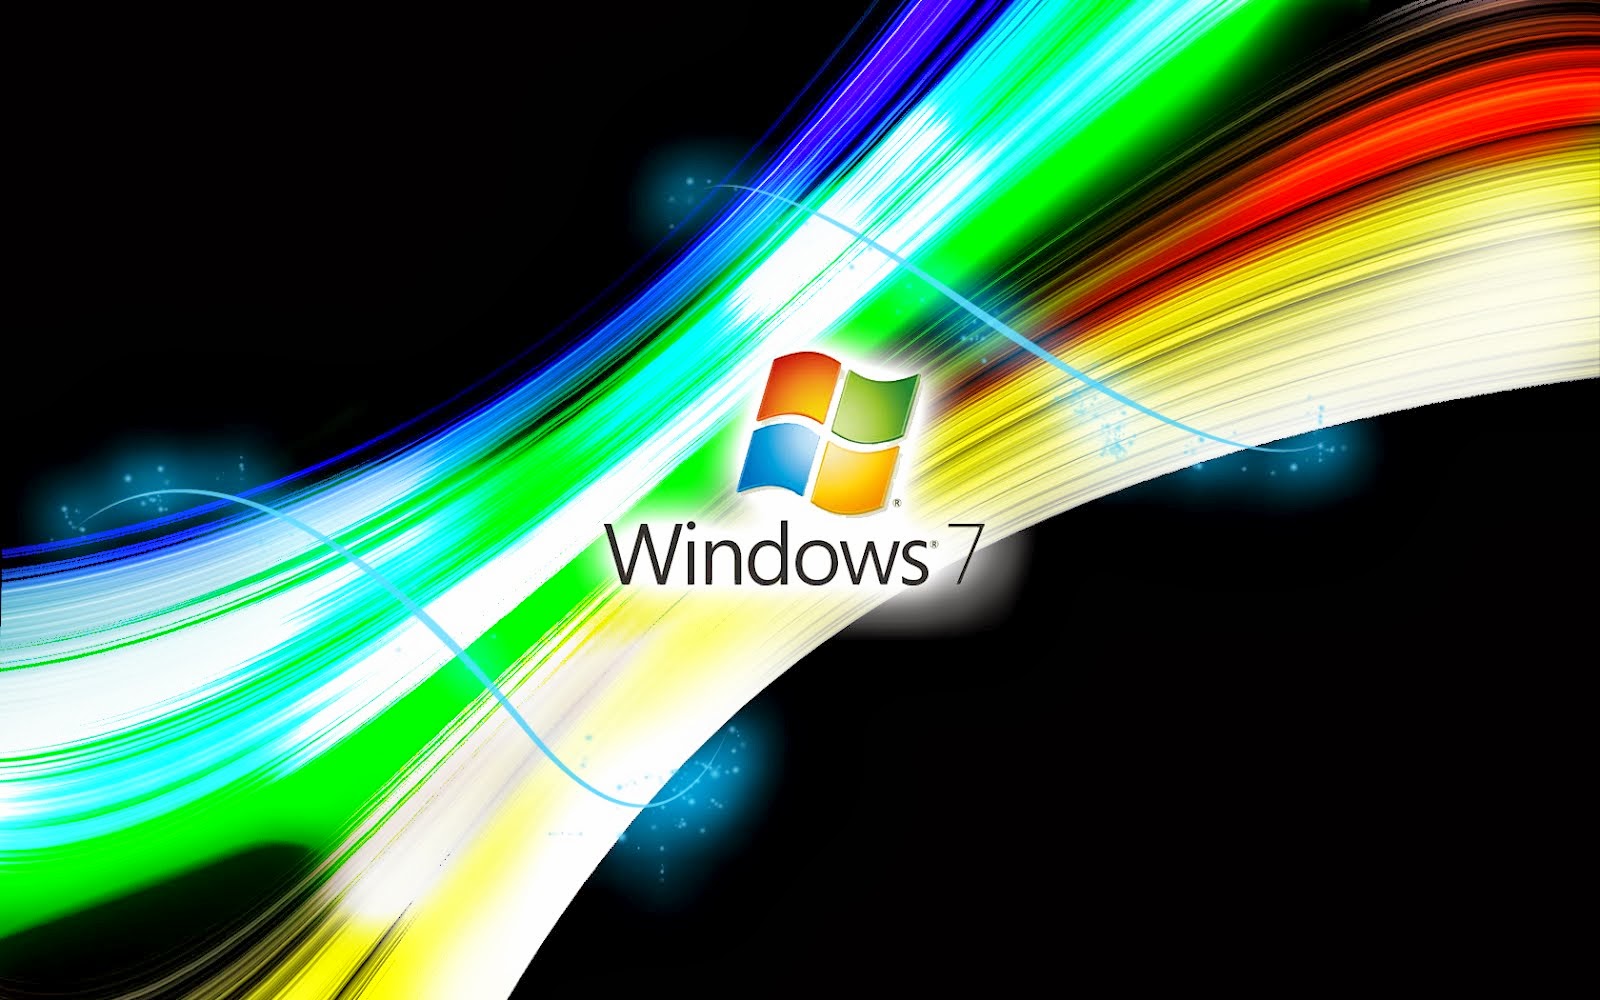 Free Animated Wallpaper For Windows 7 in high resolution for free